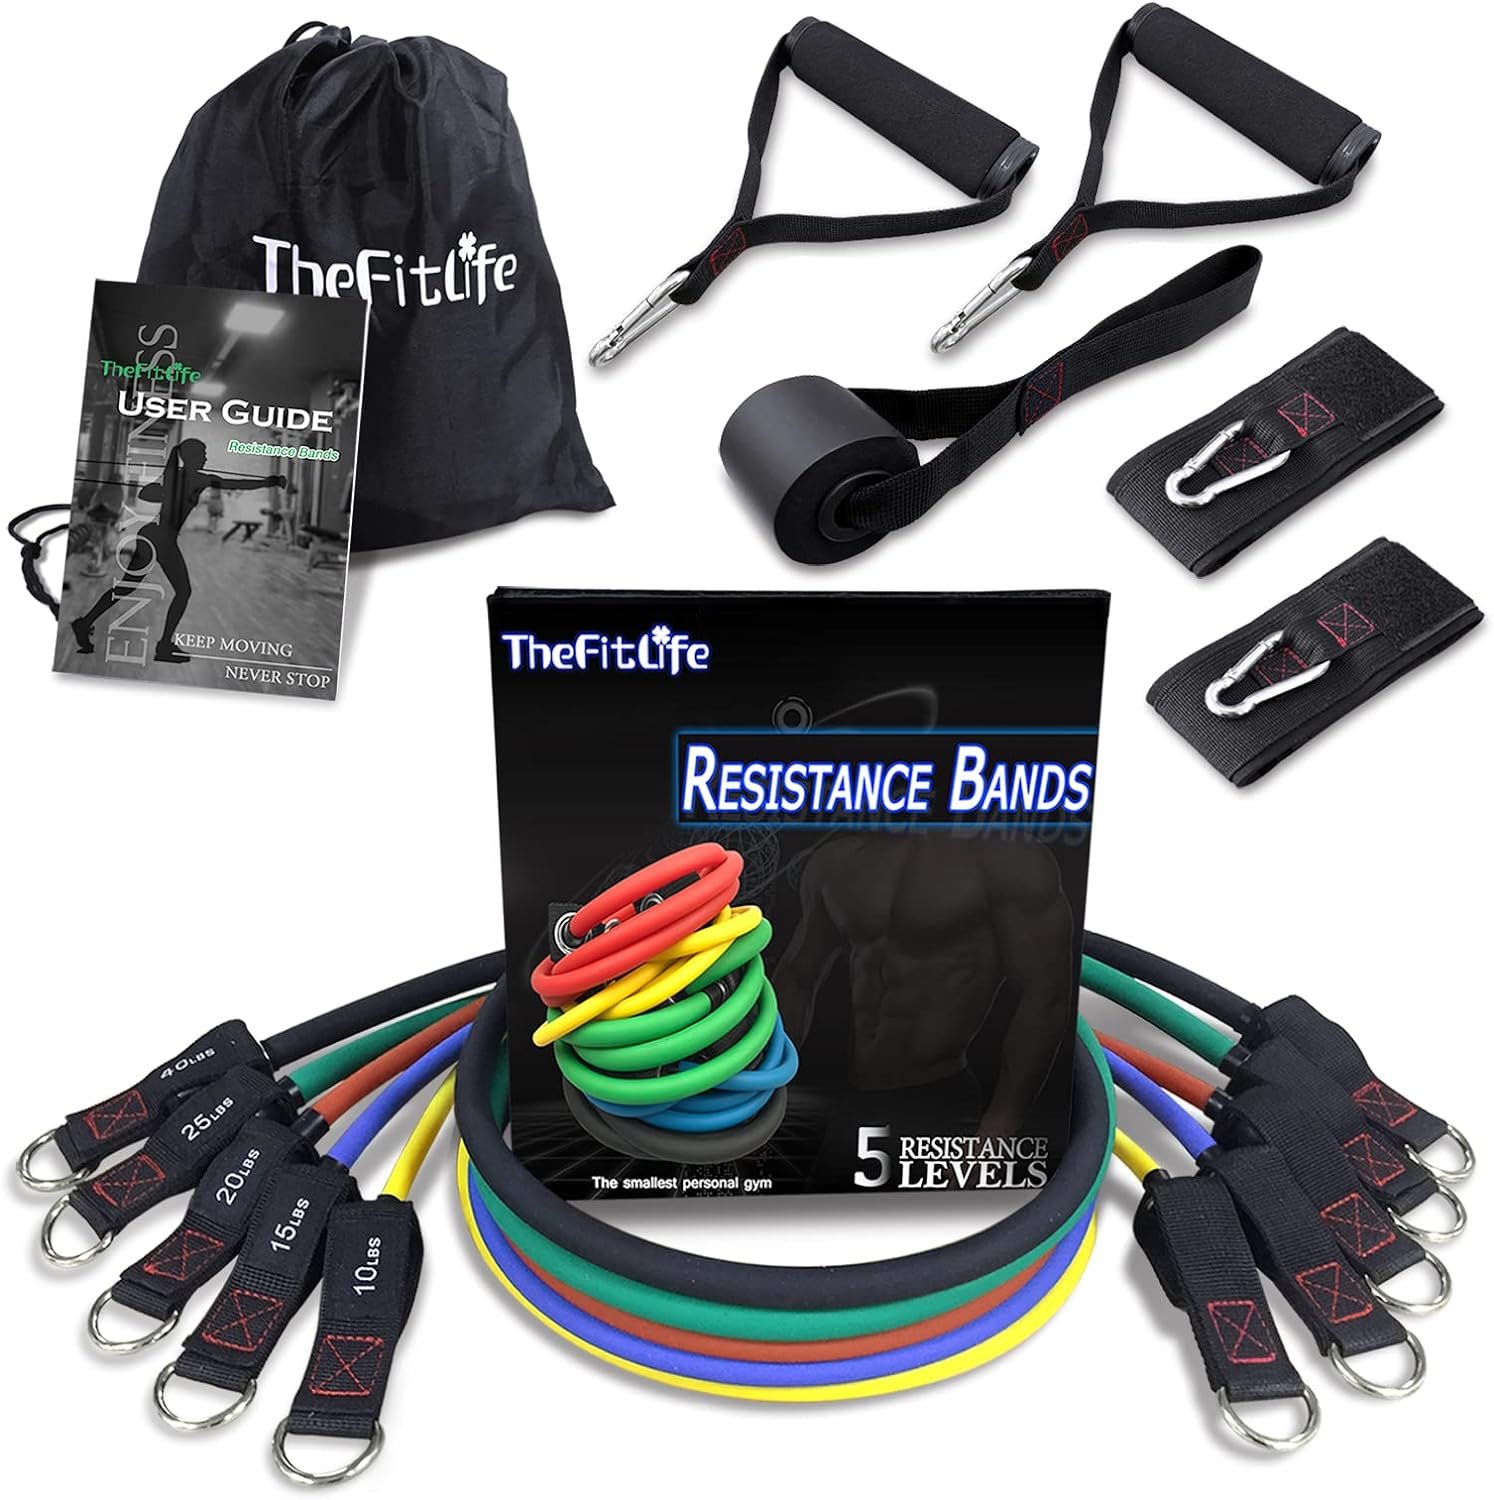 TheFitLife Exercise Resistance Bands Review